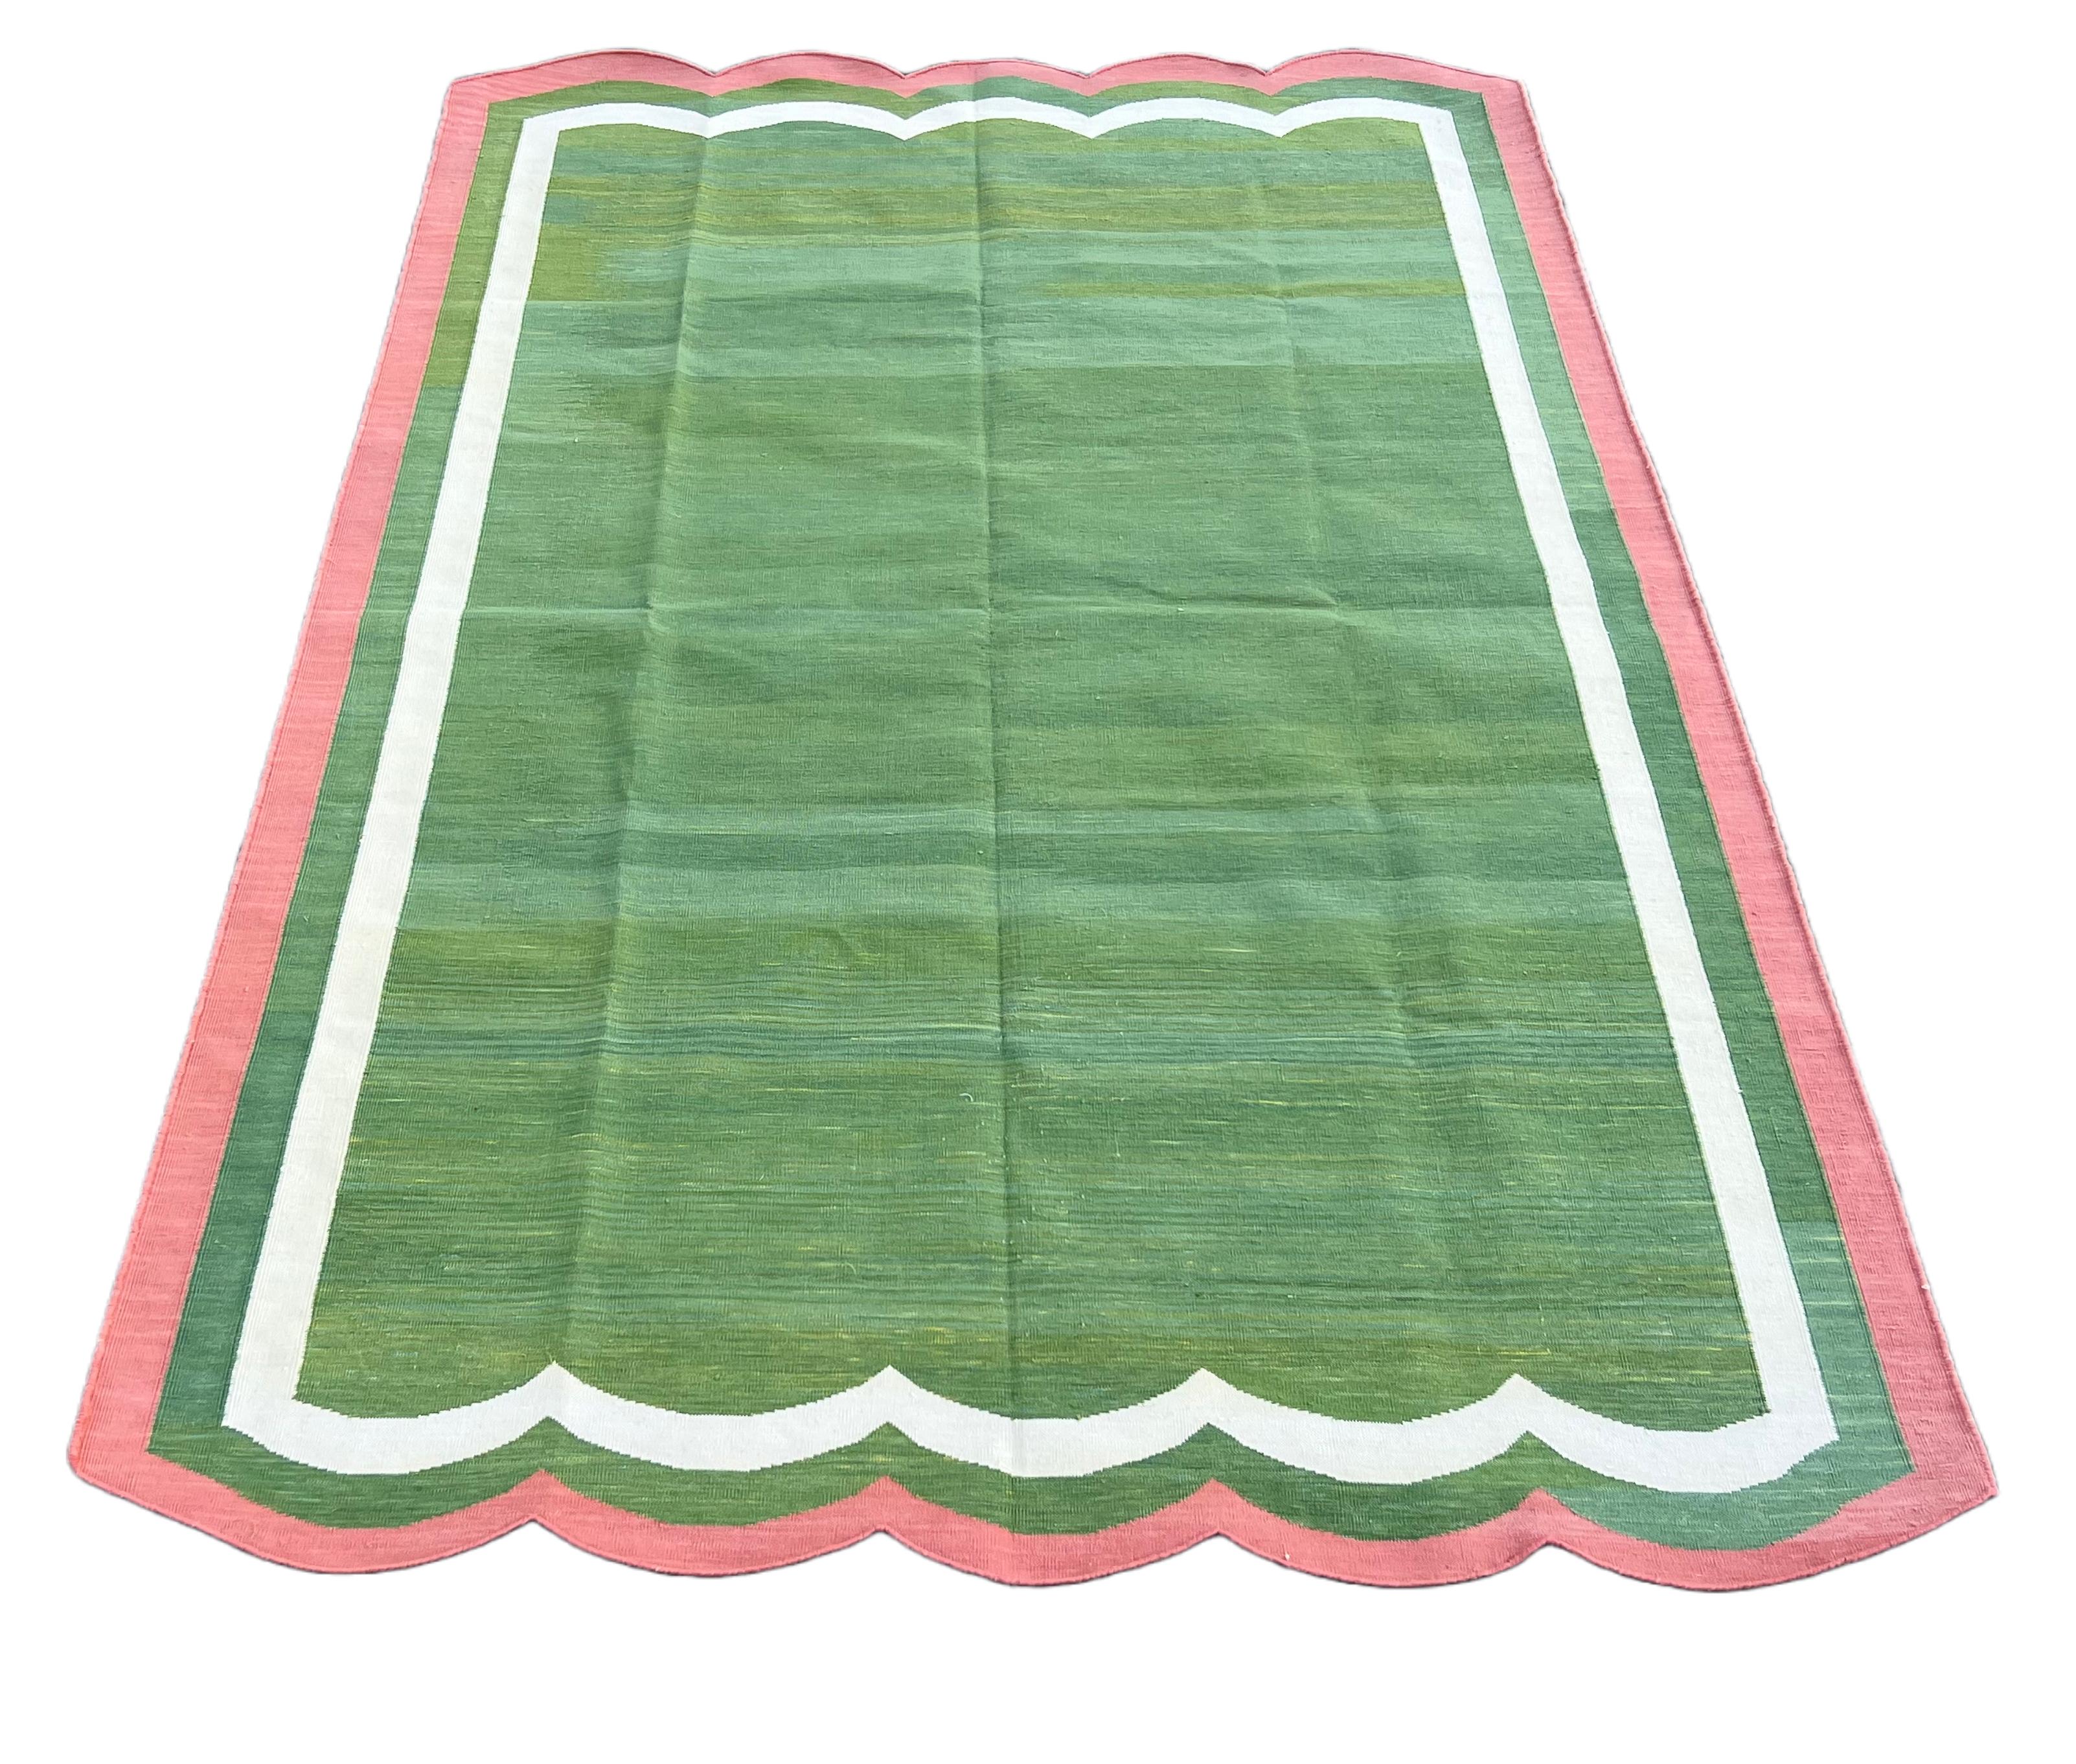 Handmade Cotton Area Flat Weave Rug, 5x8 Green And Pink Scalloped Kilim Dhurrie In New Condition For Sale In Jaipur, IN